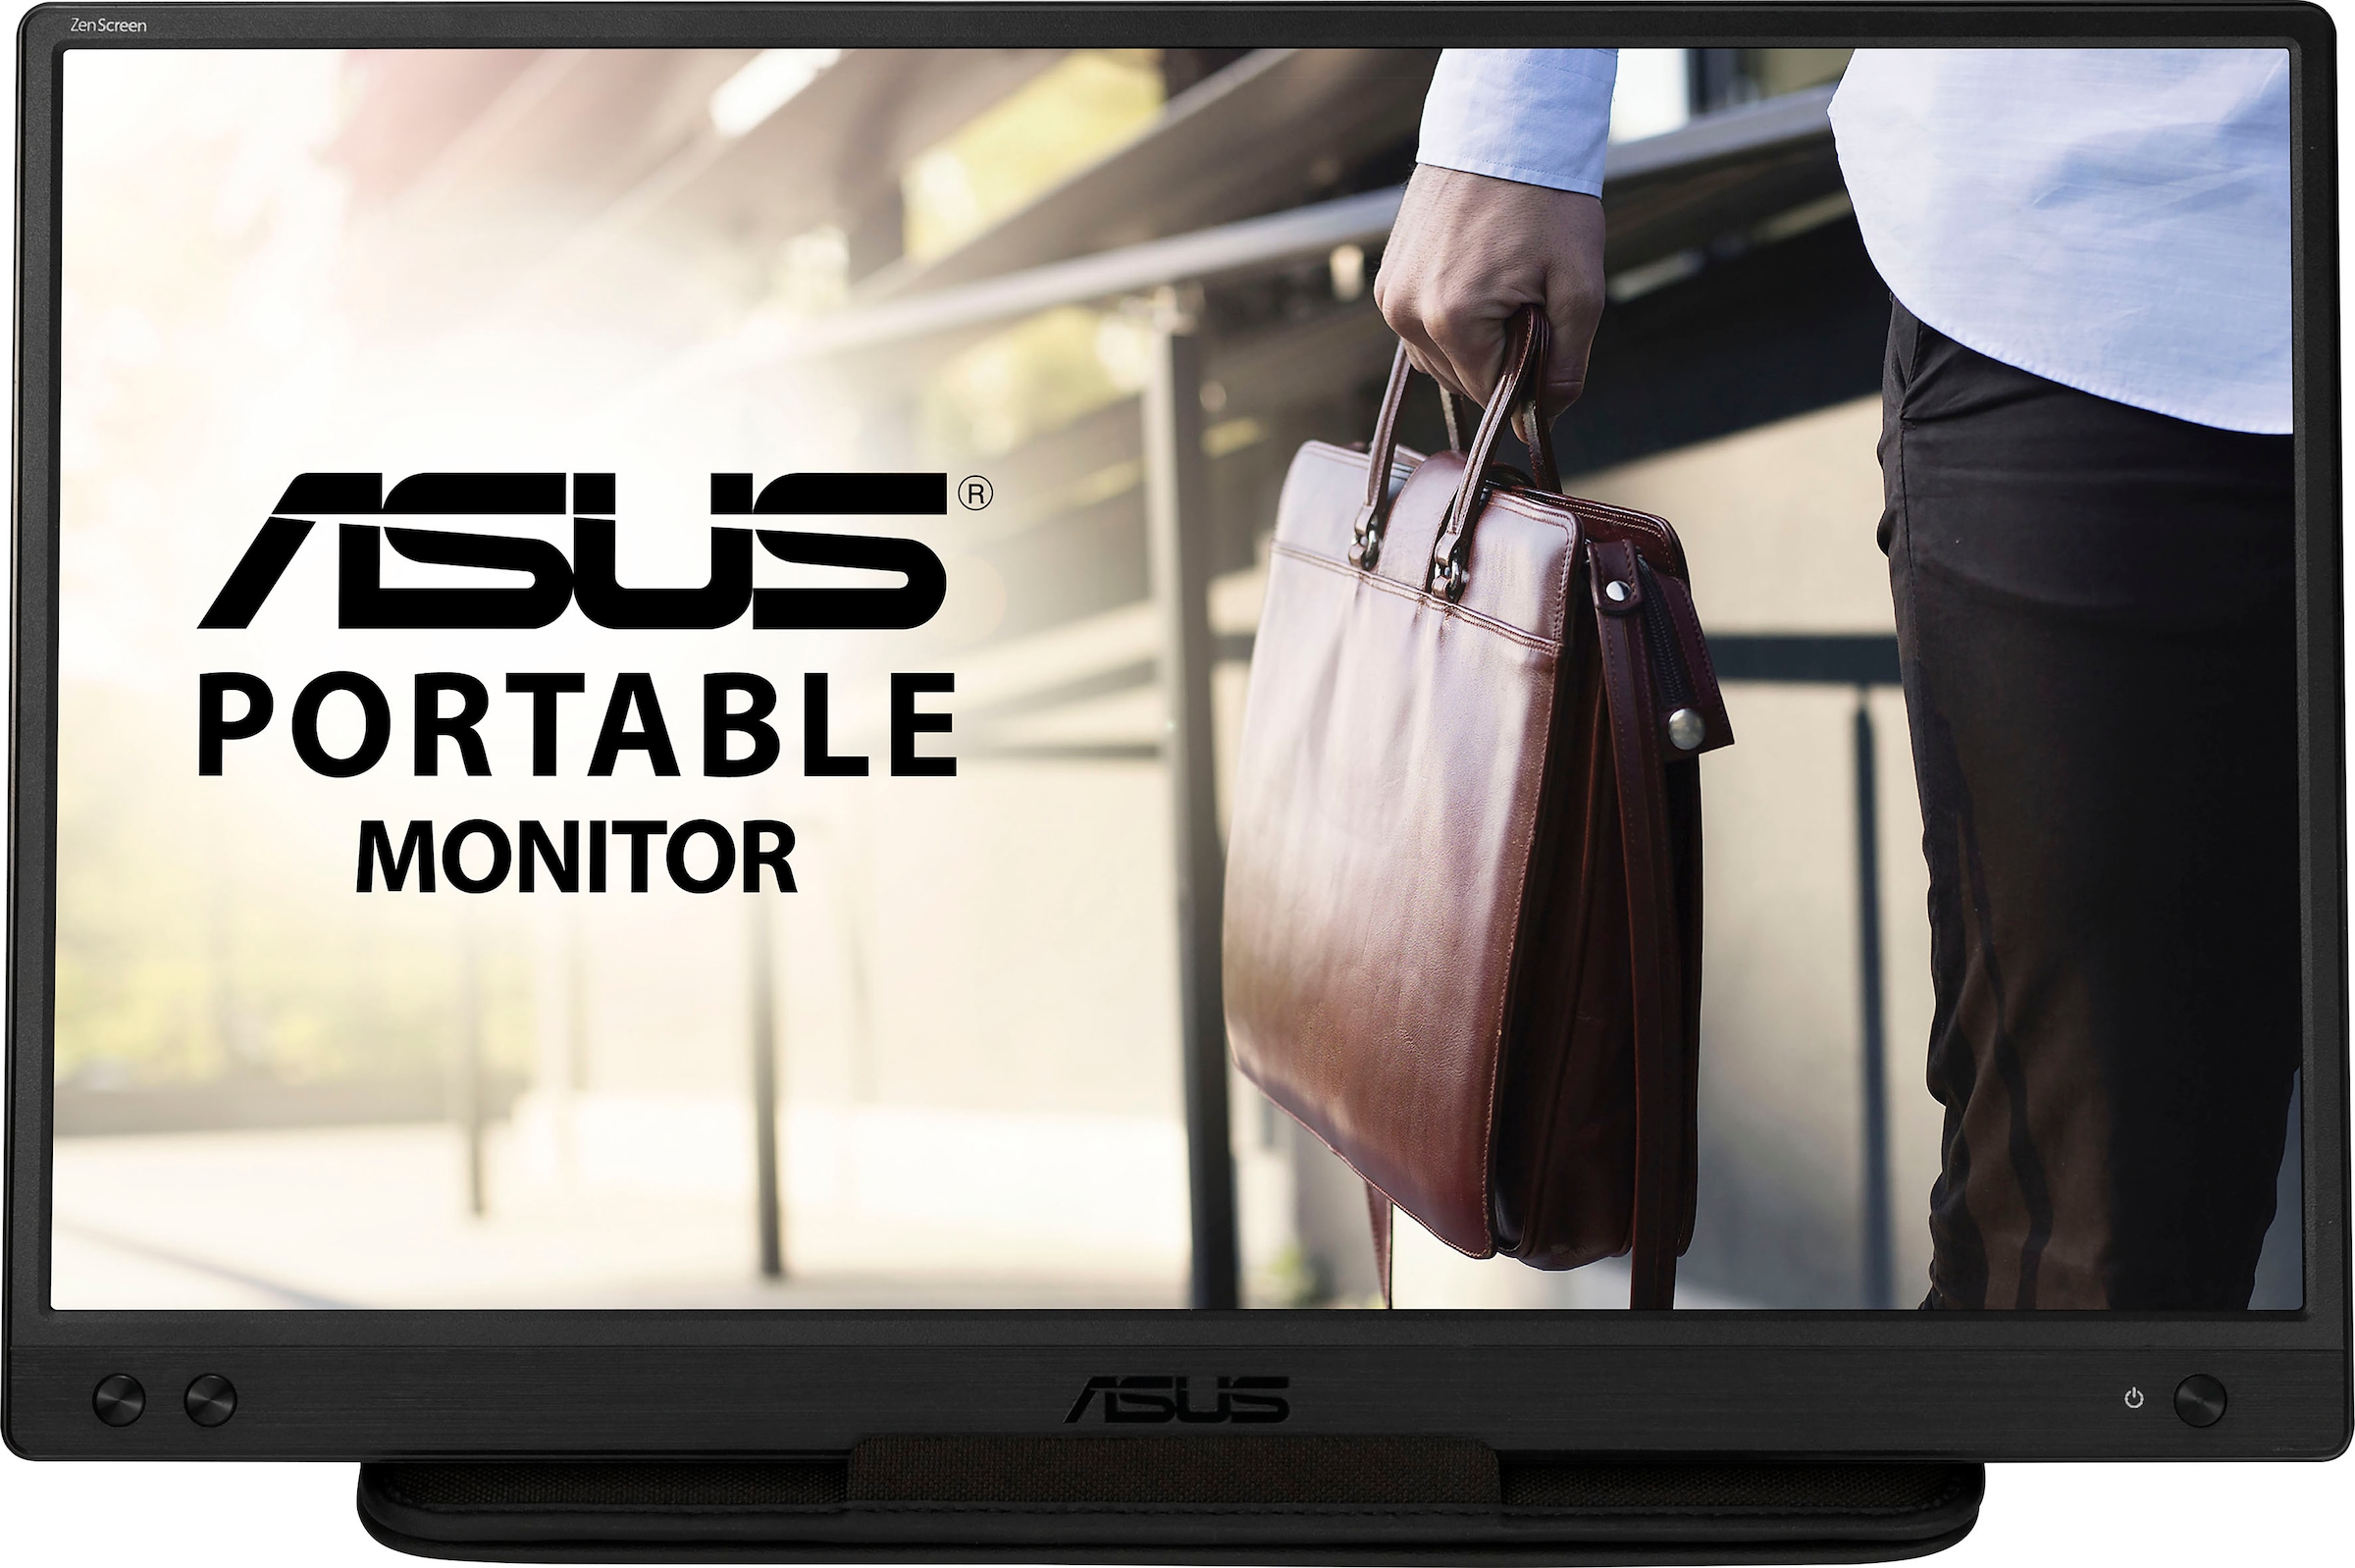 Asus Portabler Monitor »MB166C«, 40 cm/16 Zoll, 1920 x 1080 px, Full HD, 5 ms Reaktionszeit, 60 Hz